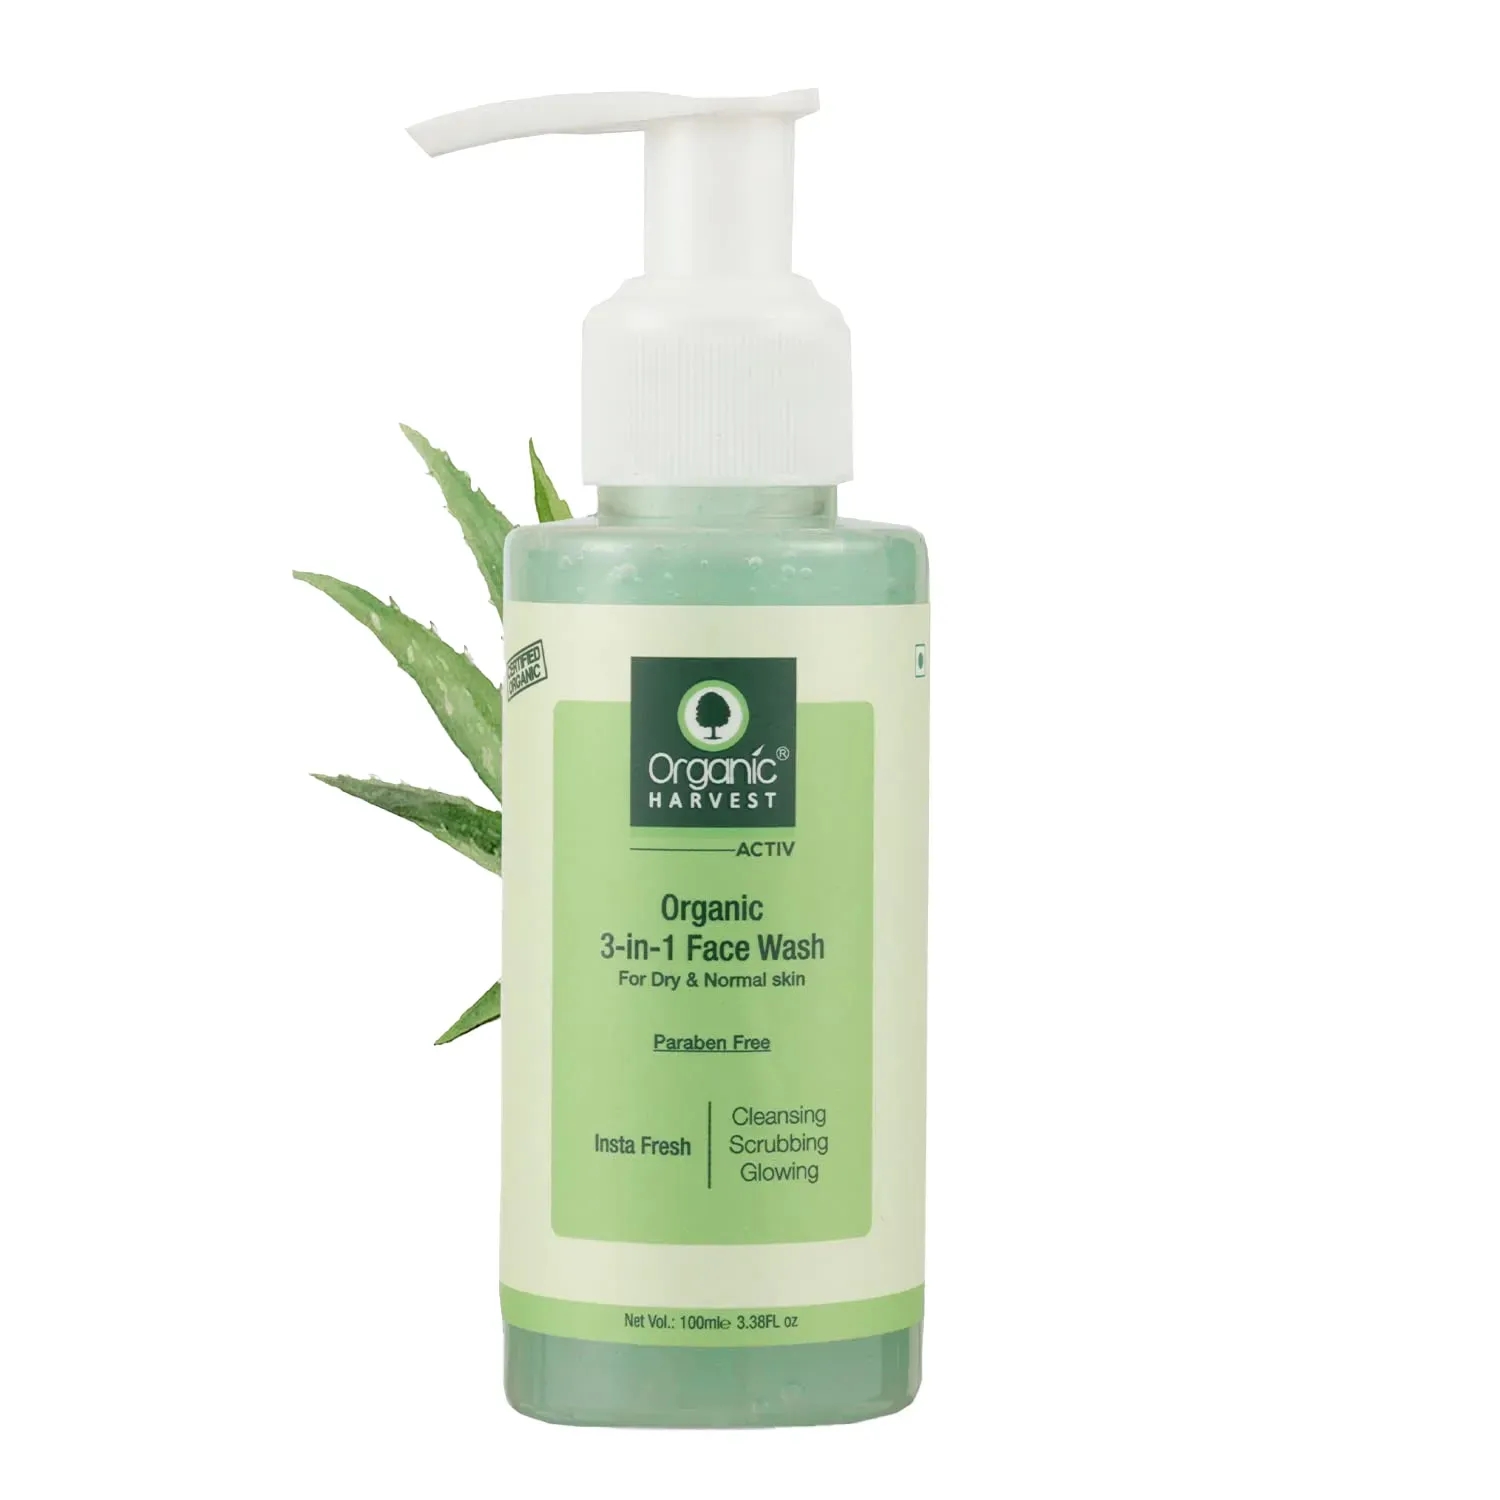 Organic Harvest | Organic Harvest 3-In-1 Face Wash for Dry and Normal Skin (100g)